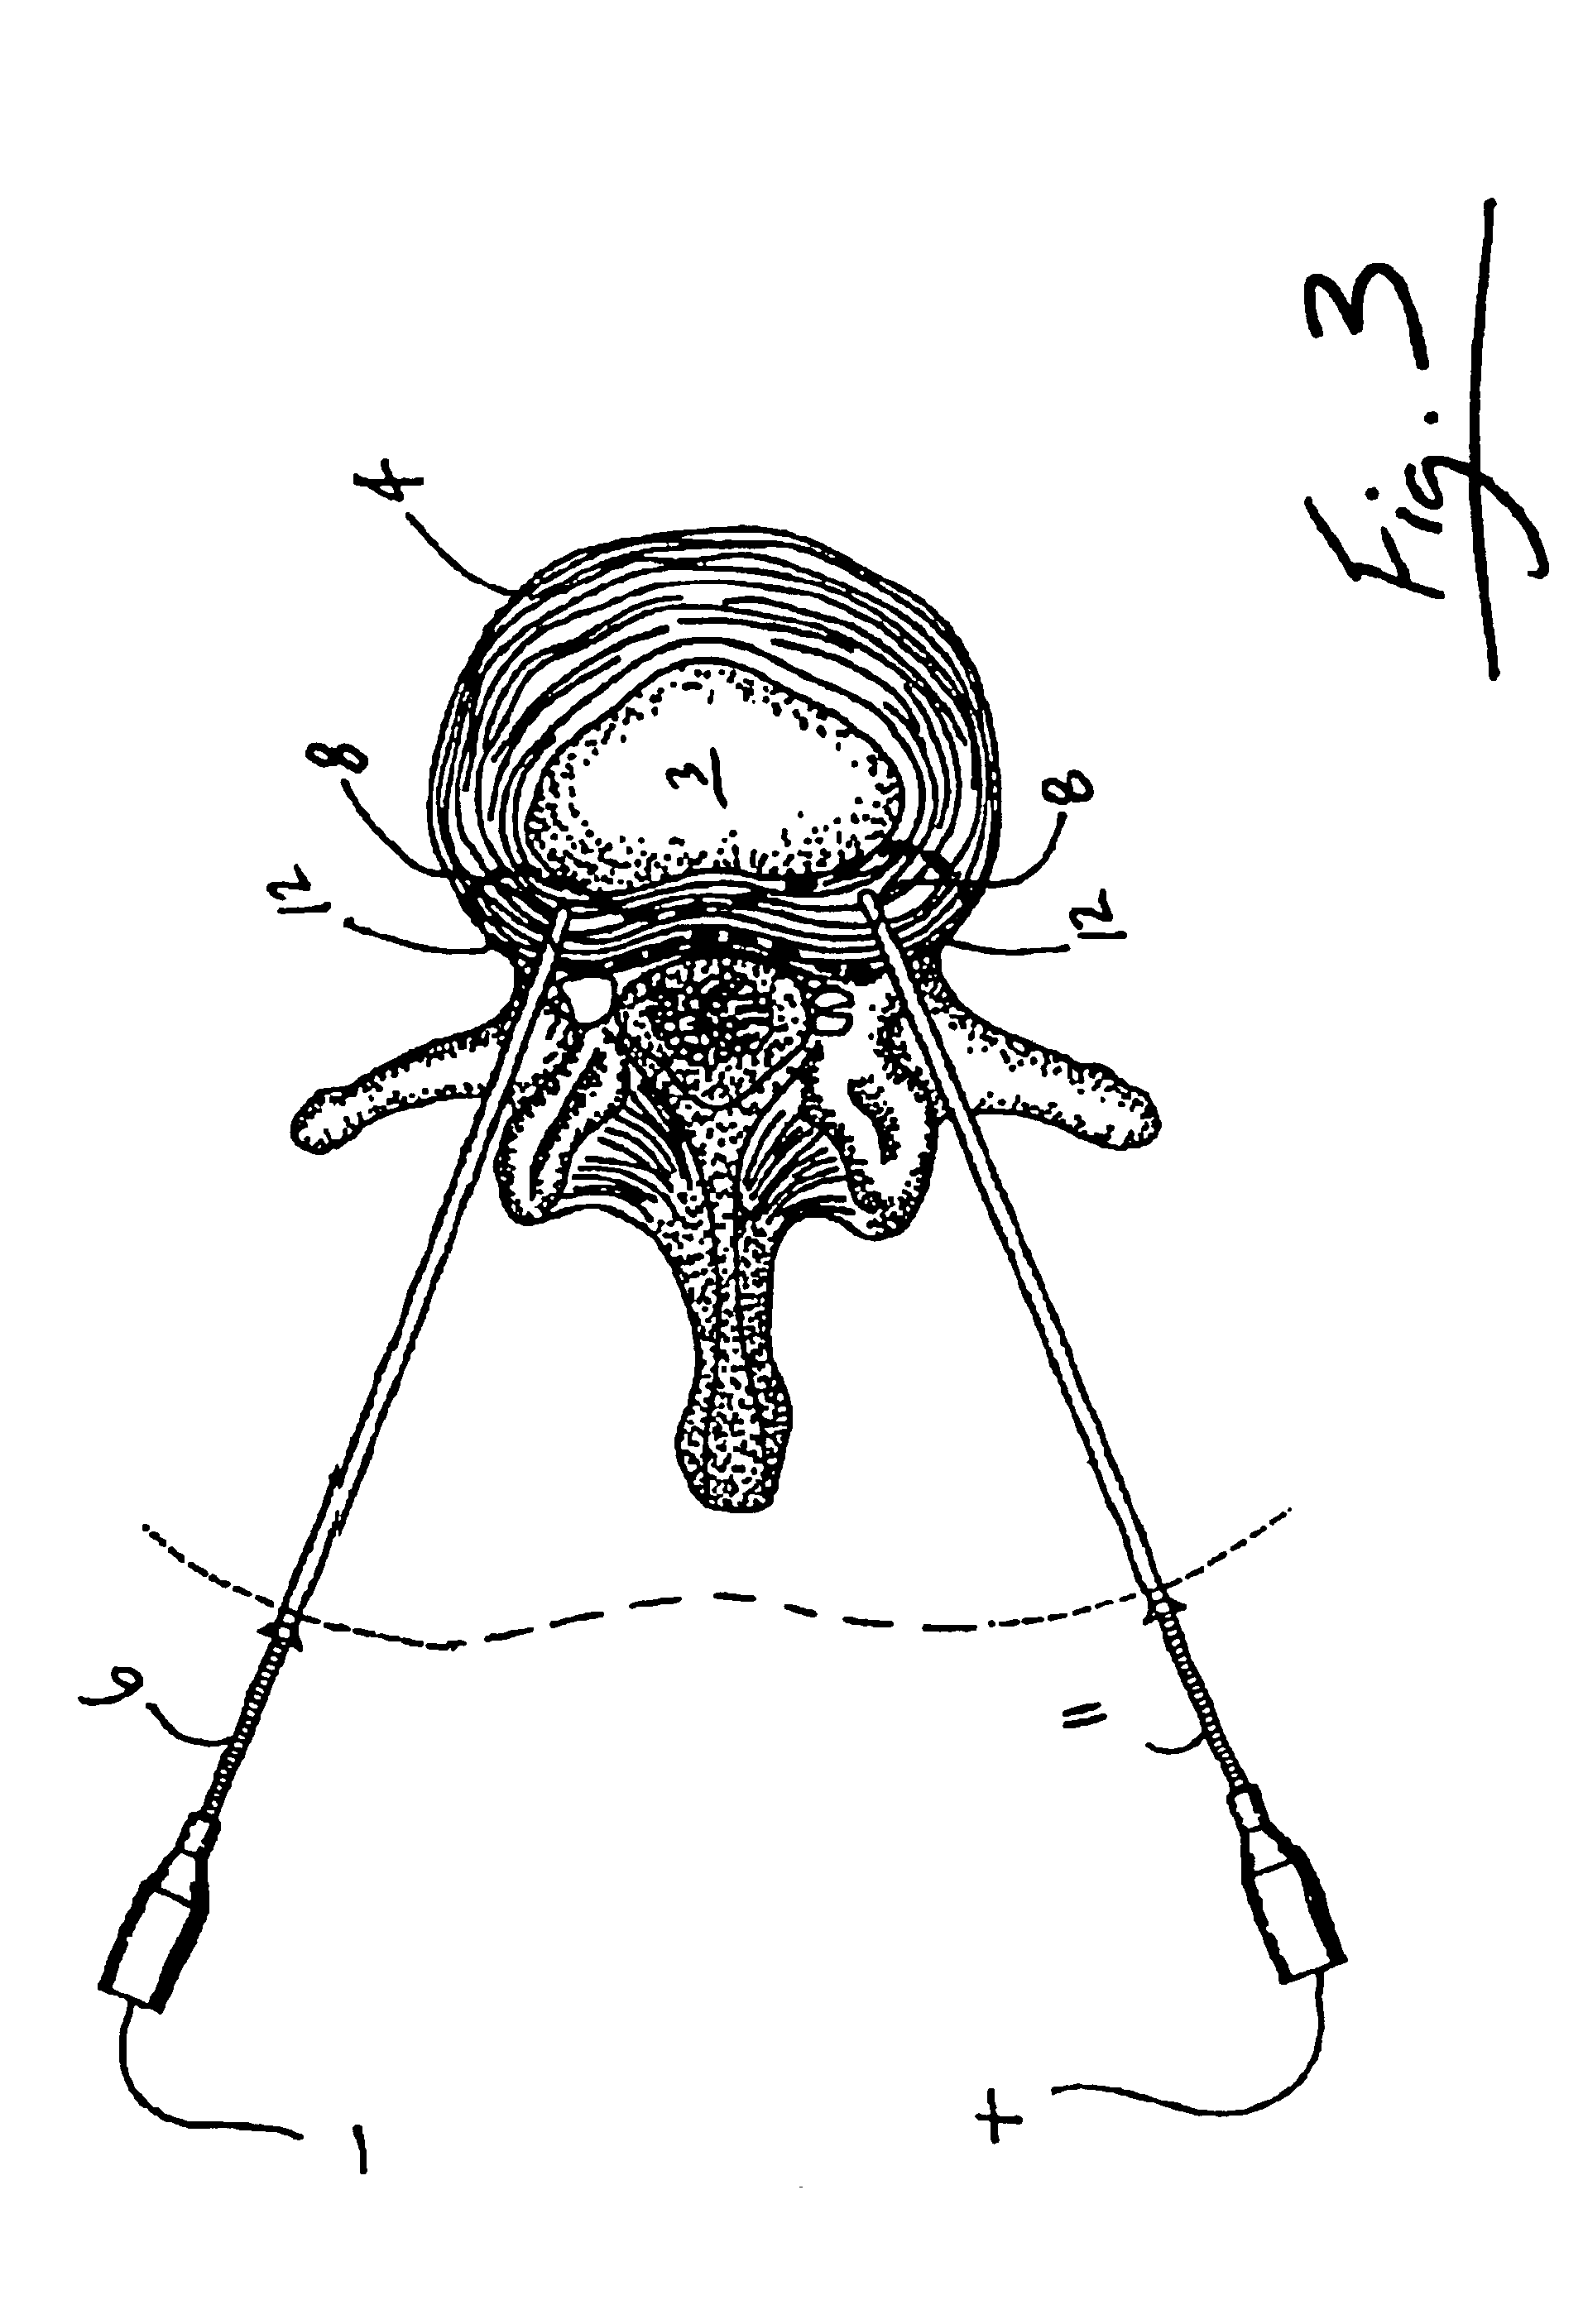 Intradiscal lesioning device